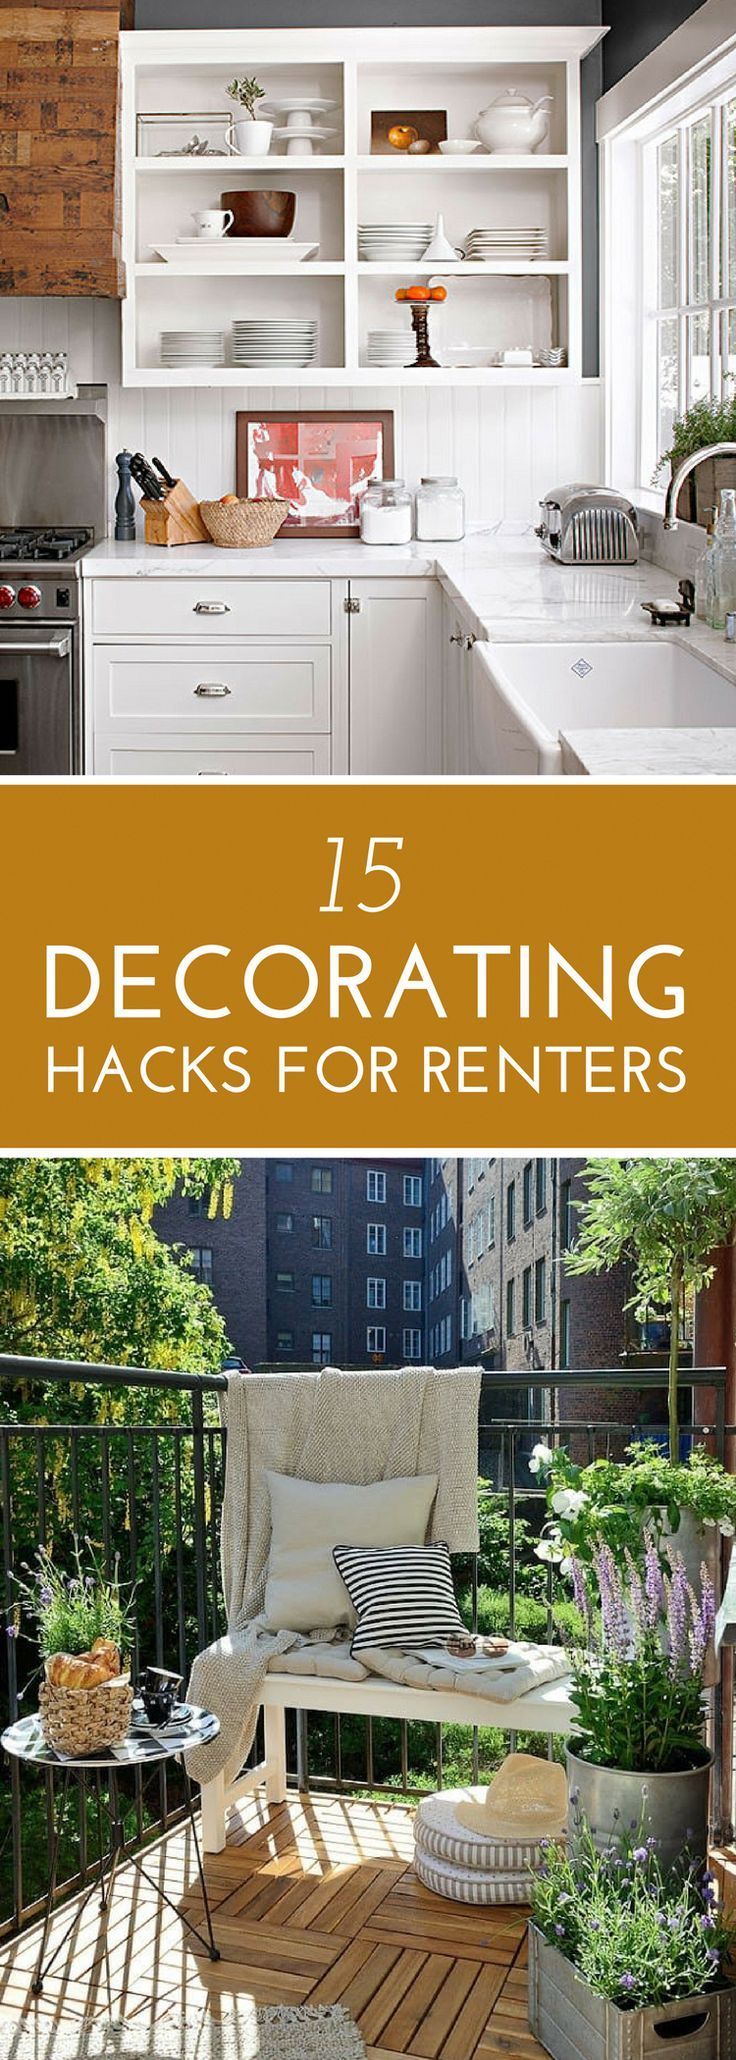 15 Decorating Hacks for Renters (That Won't Cost You Your Security Deposit) -   diy Apartment for renters